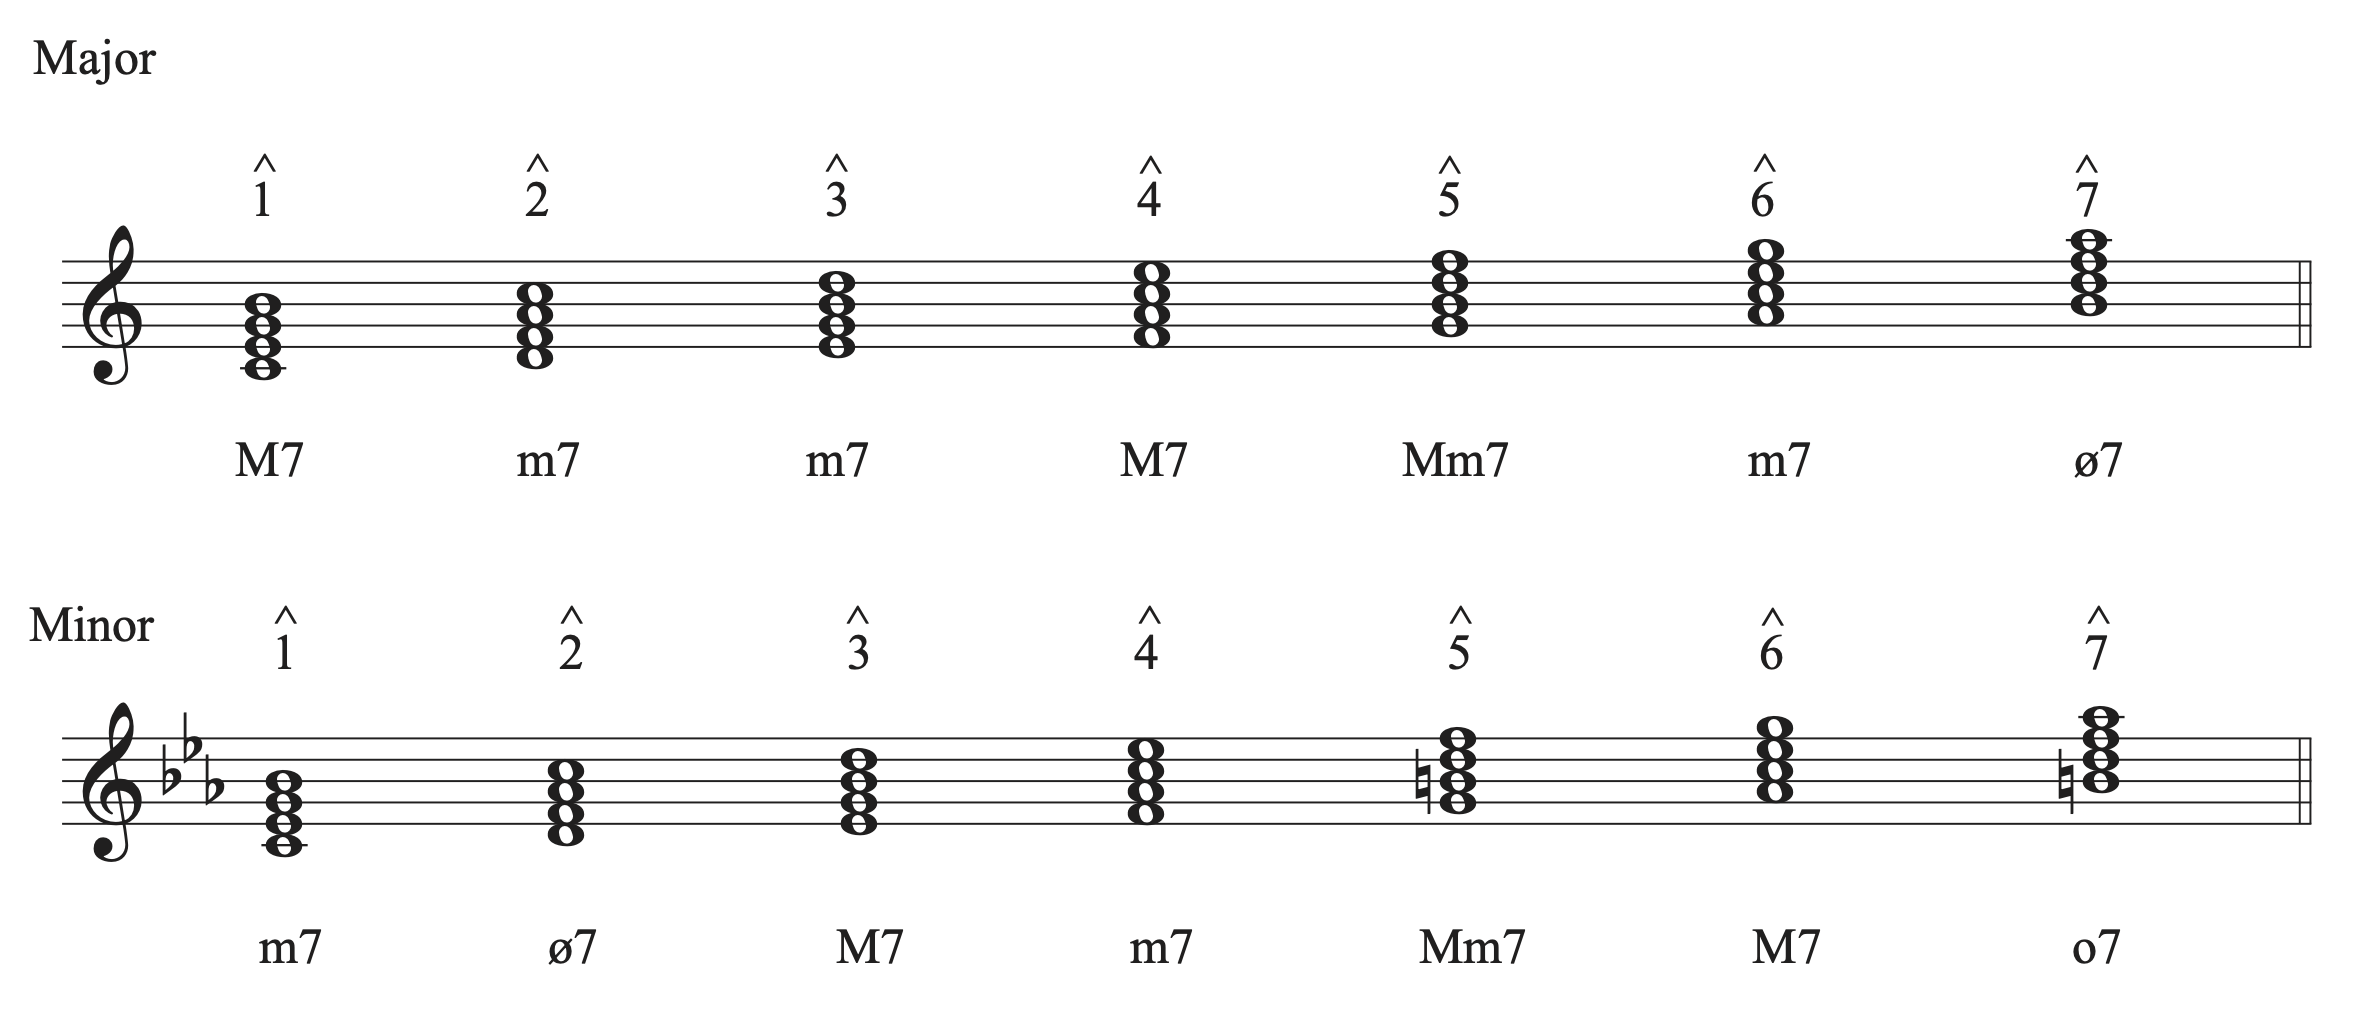 Chart showing the diatonic seventh chords built on each scale degree in a major and minor key.